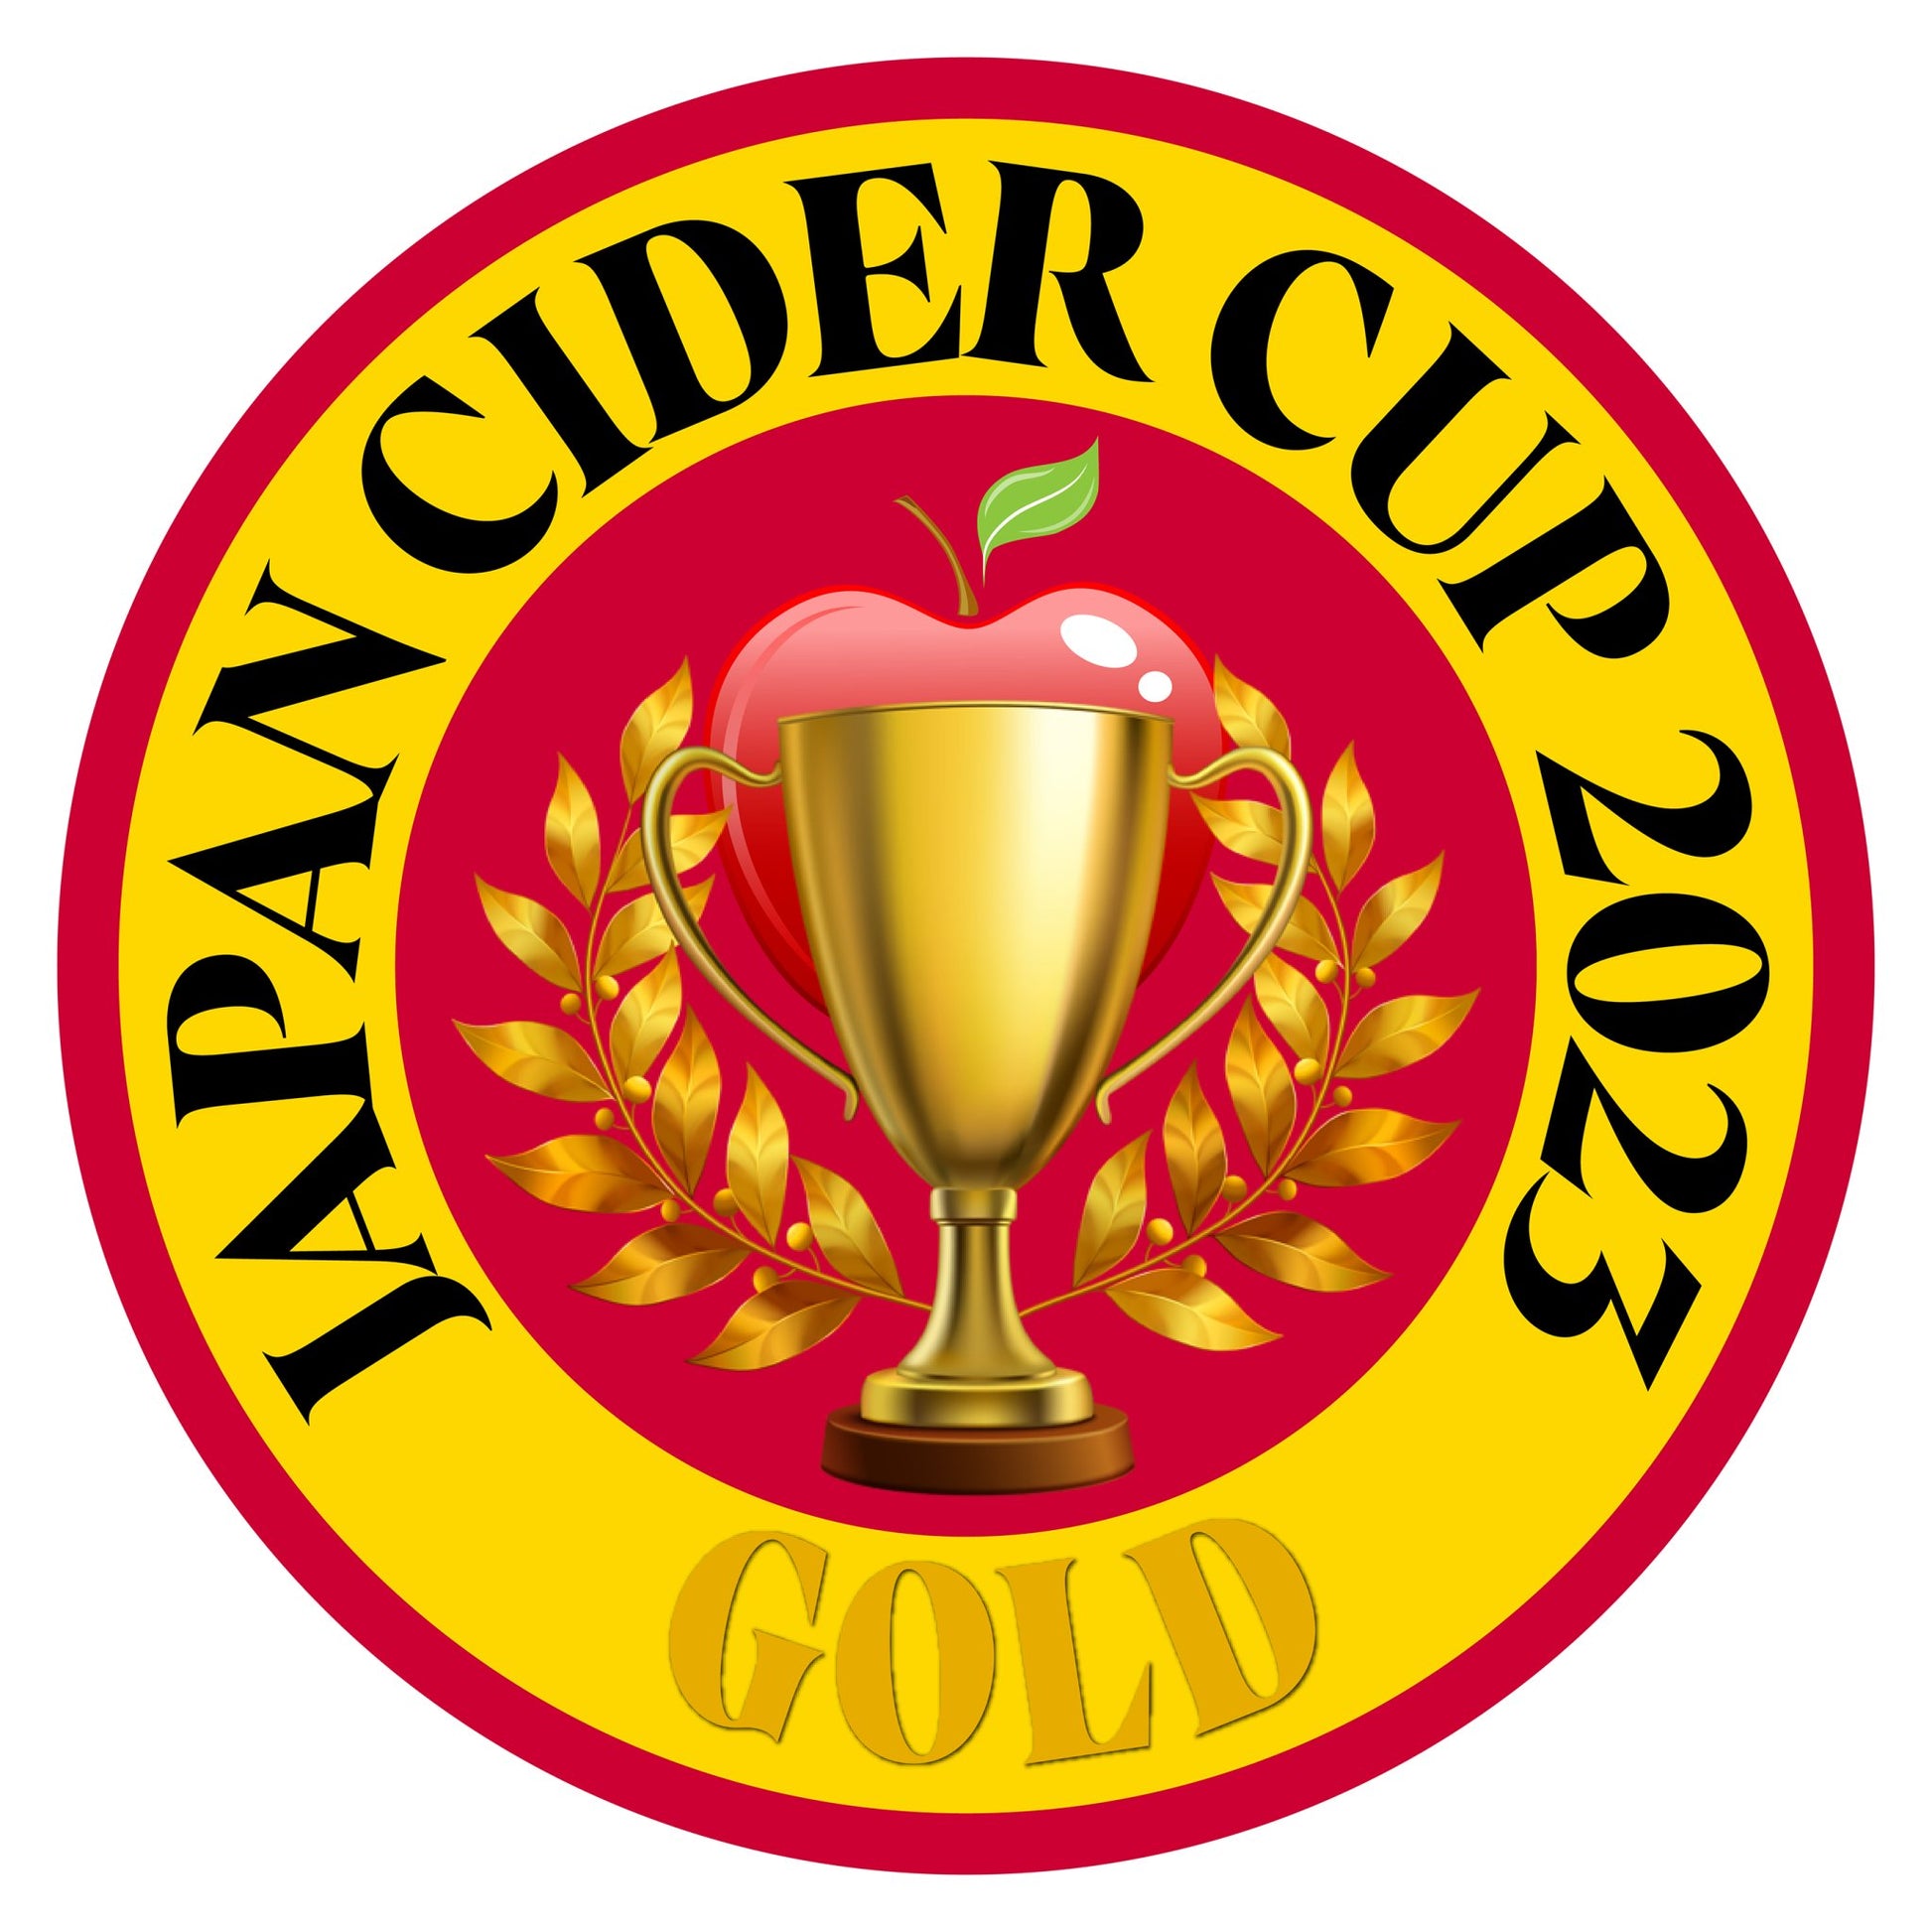 A Japan Cider Cup Gold Medal awarded to the Sparkling Perry 2021 - Methode Traditionelle Pear Cider